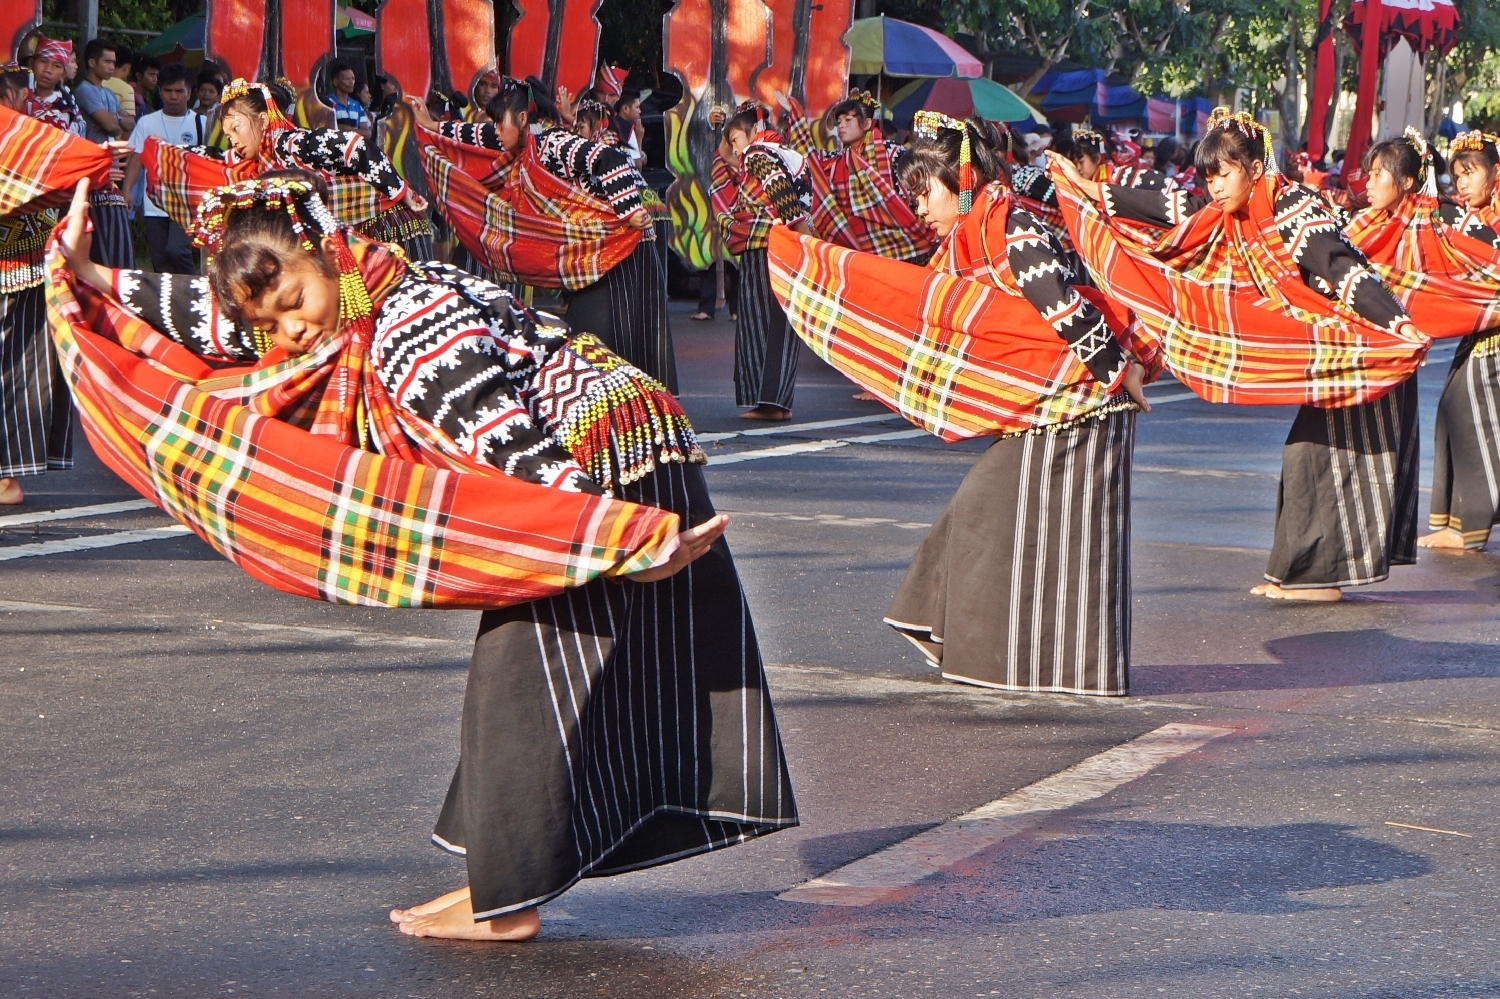 Tnalak Festival Street Dancing Competition is one of the most colorful in Mindanao